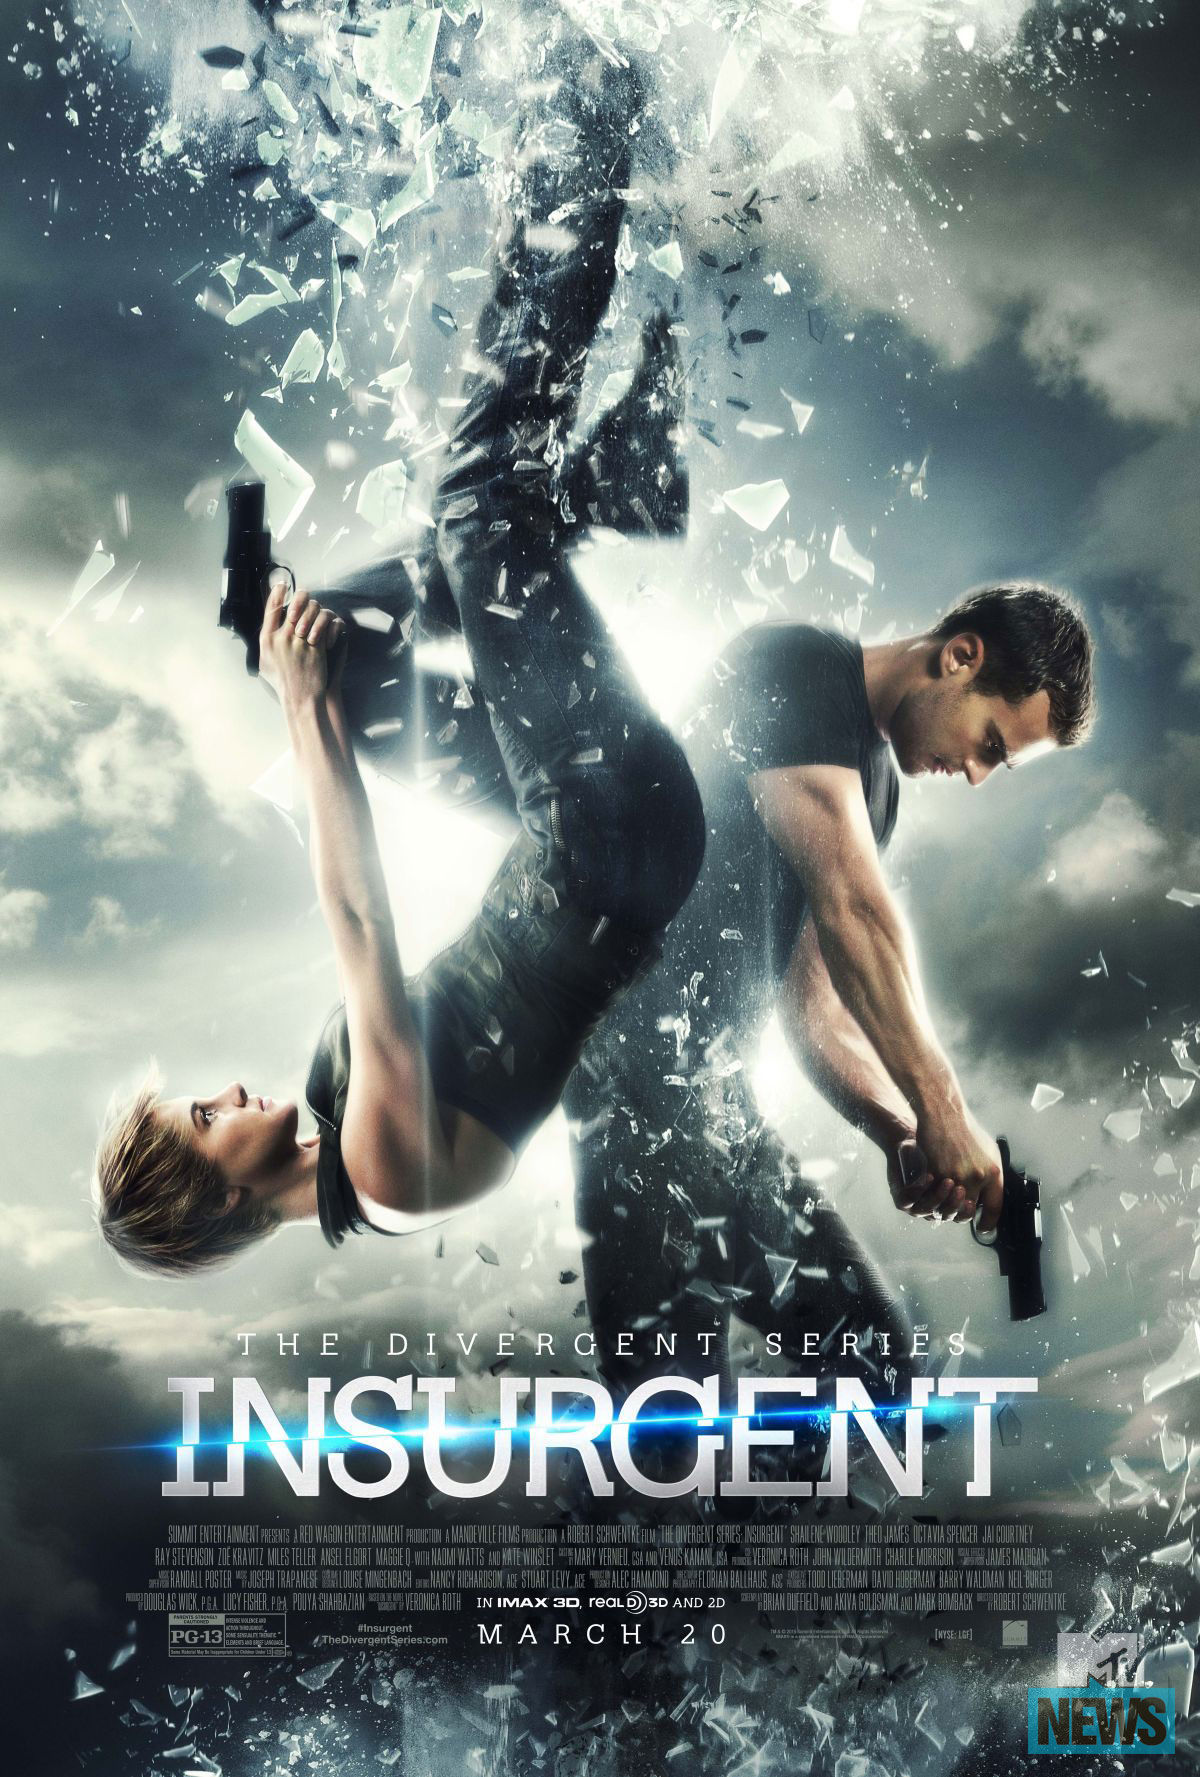 Check Out Final “Insurgent” Poster, New Book Cover and Advanced Look At Full Trailer